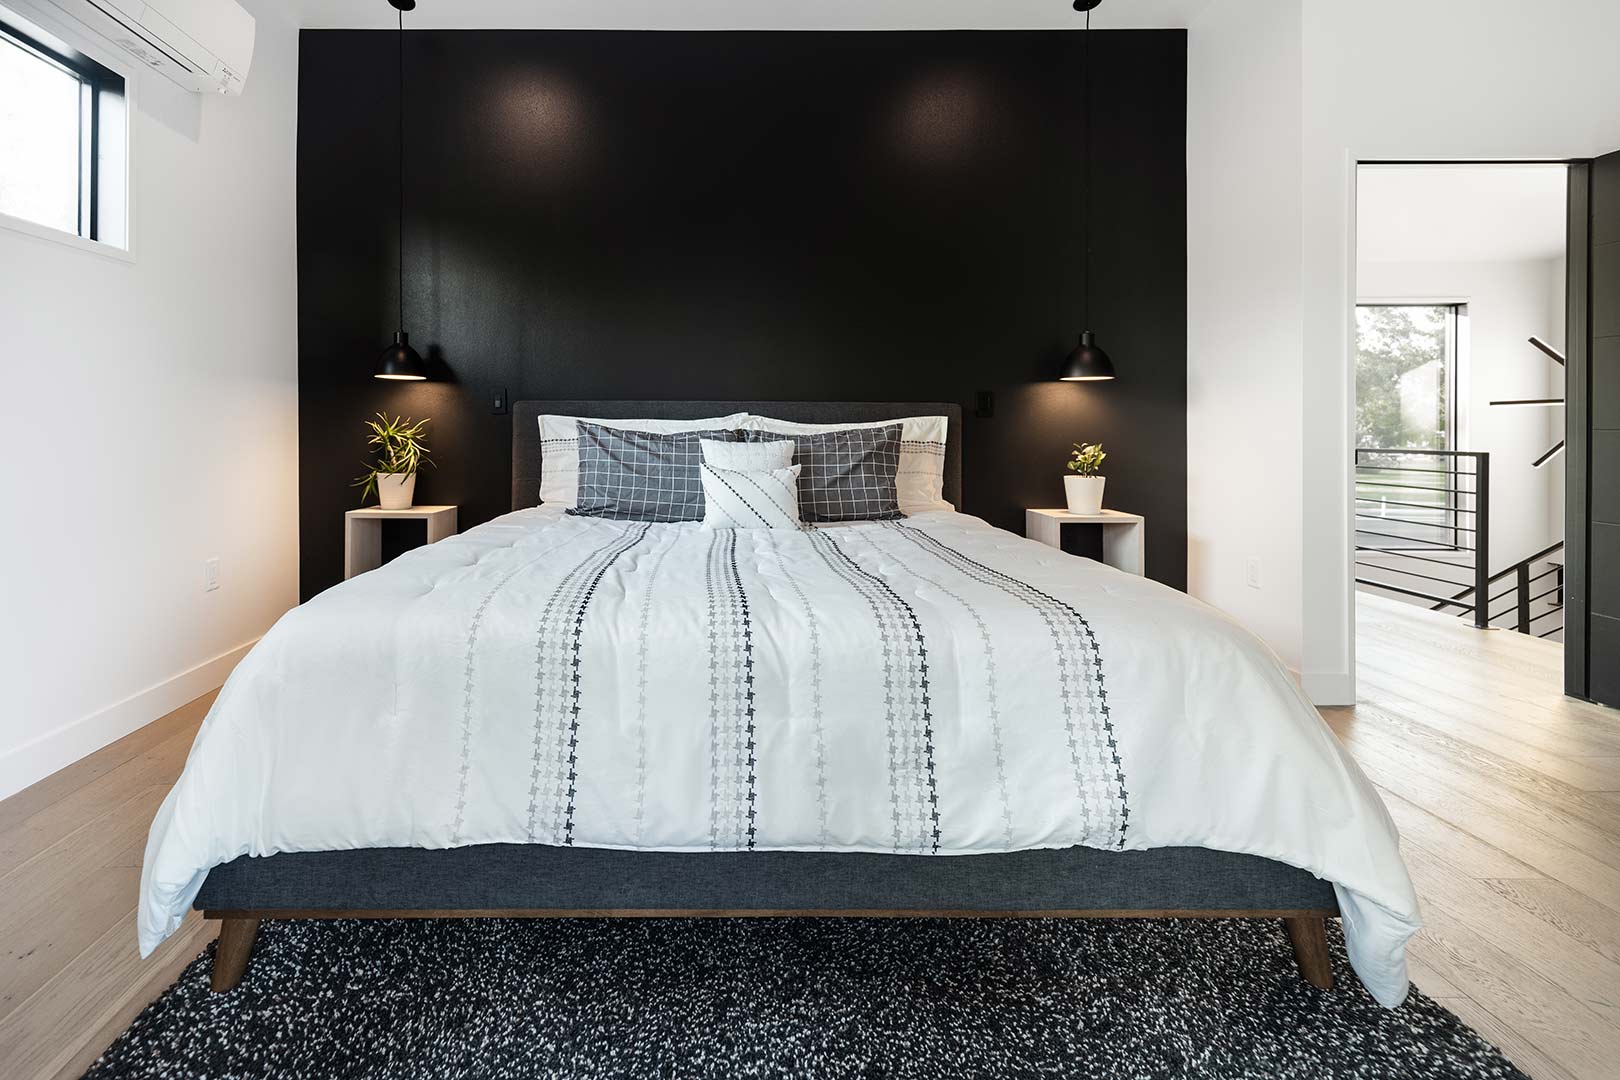 The master bedroom of this Fort Collins home remodel has a black accent wall with floating pendant lights and night stands